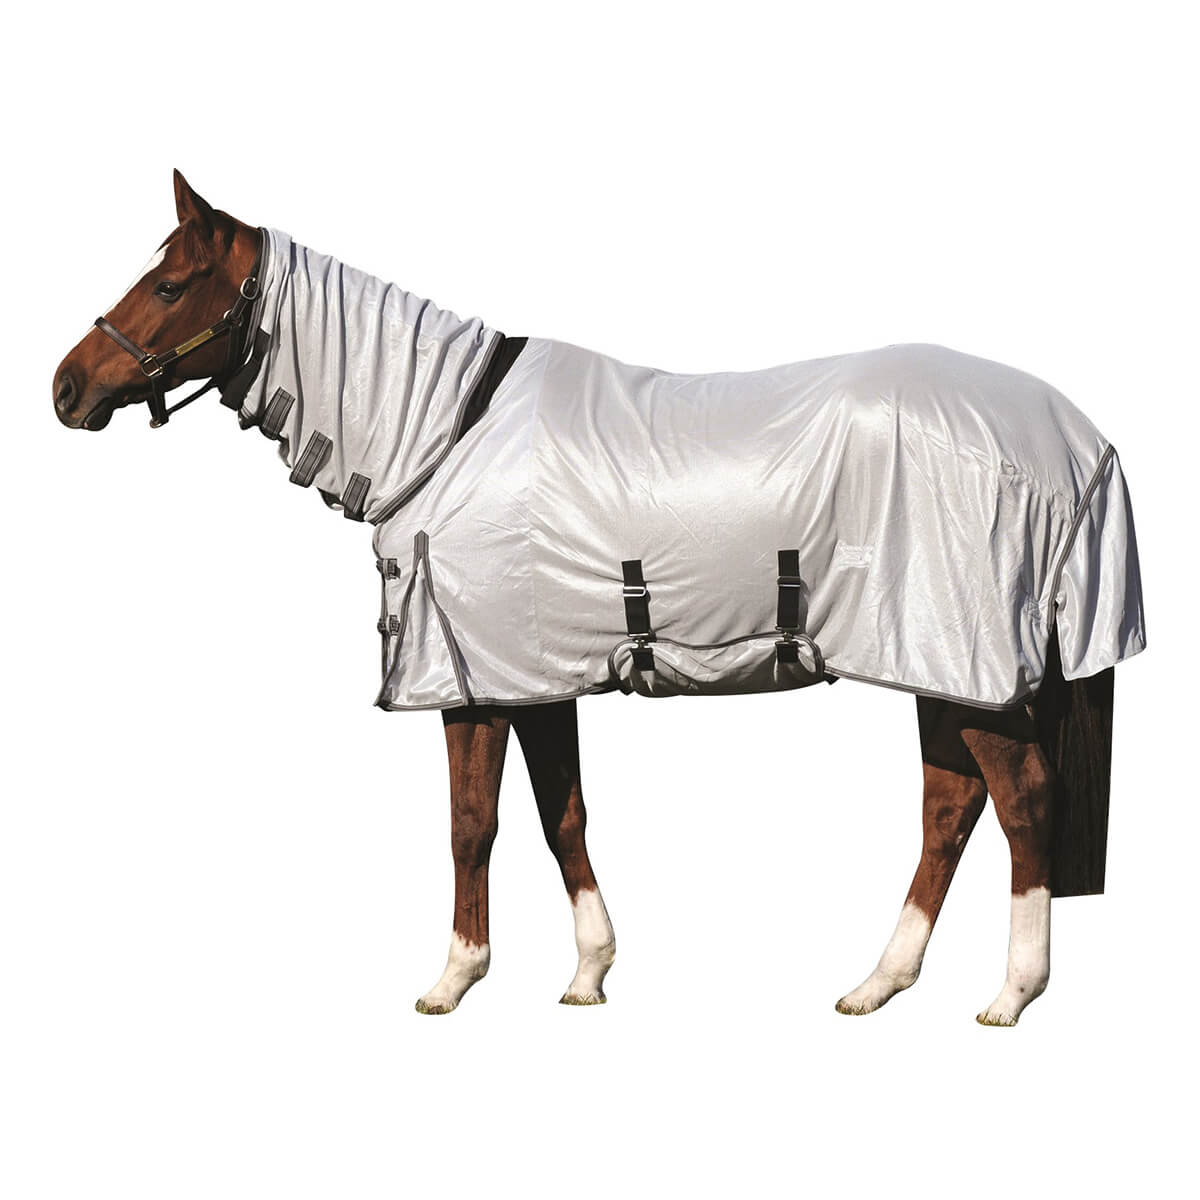 Century Deluxe Fly Sheet With Belly Guard